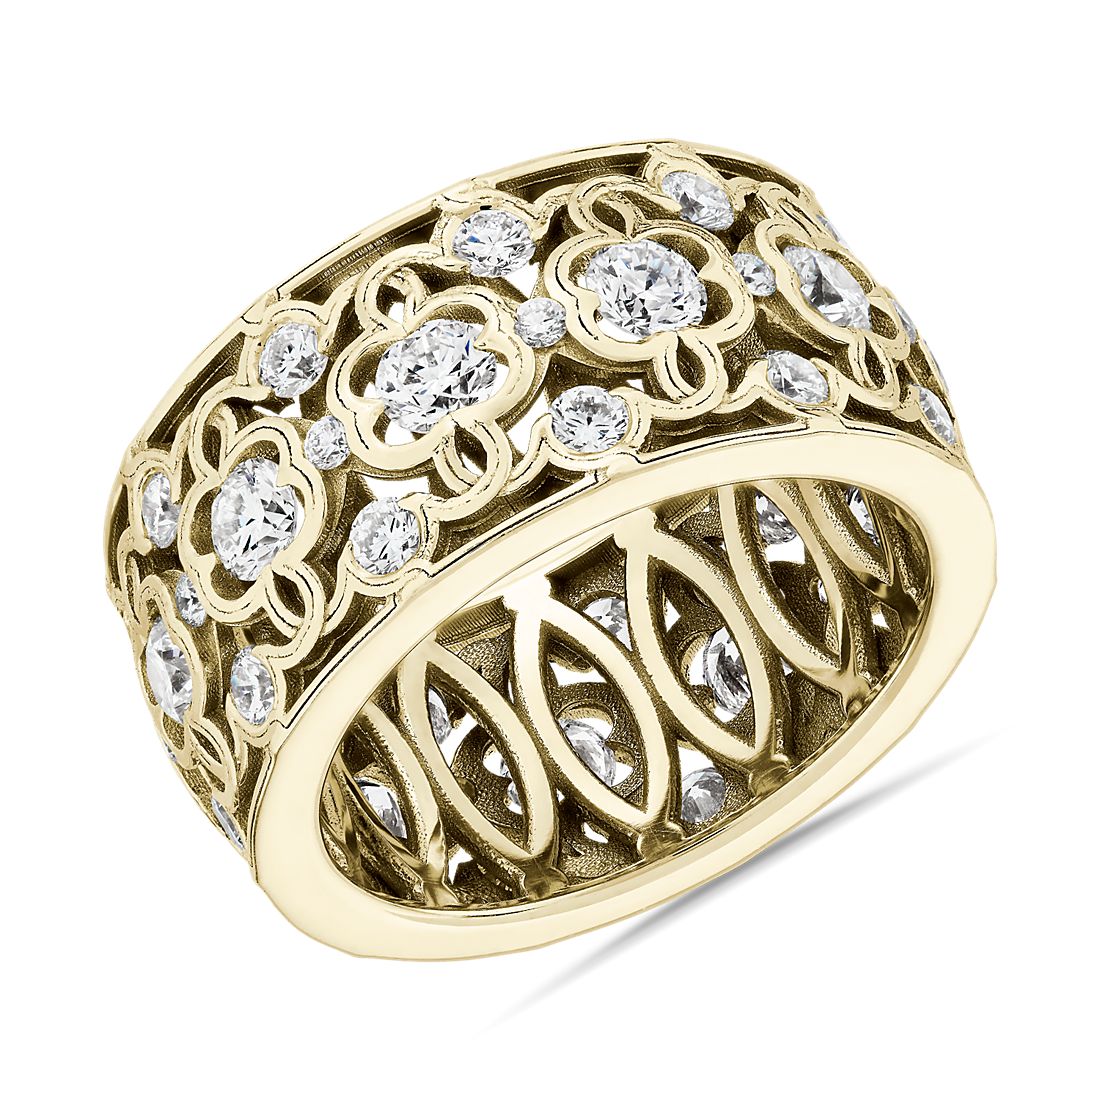 Bella Vaughan Clover Lace Diamond Eternity Ring in 18k Yellow Gold (1.67 ct. tw.)